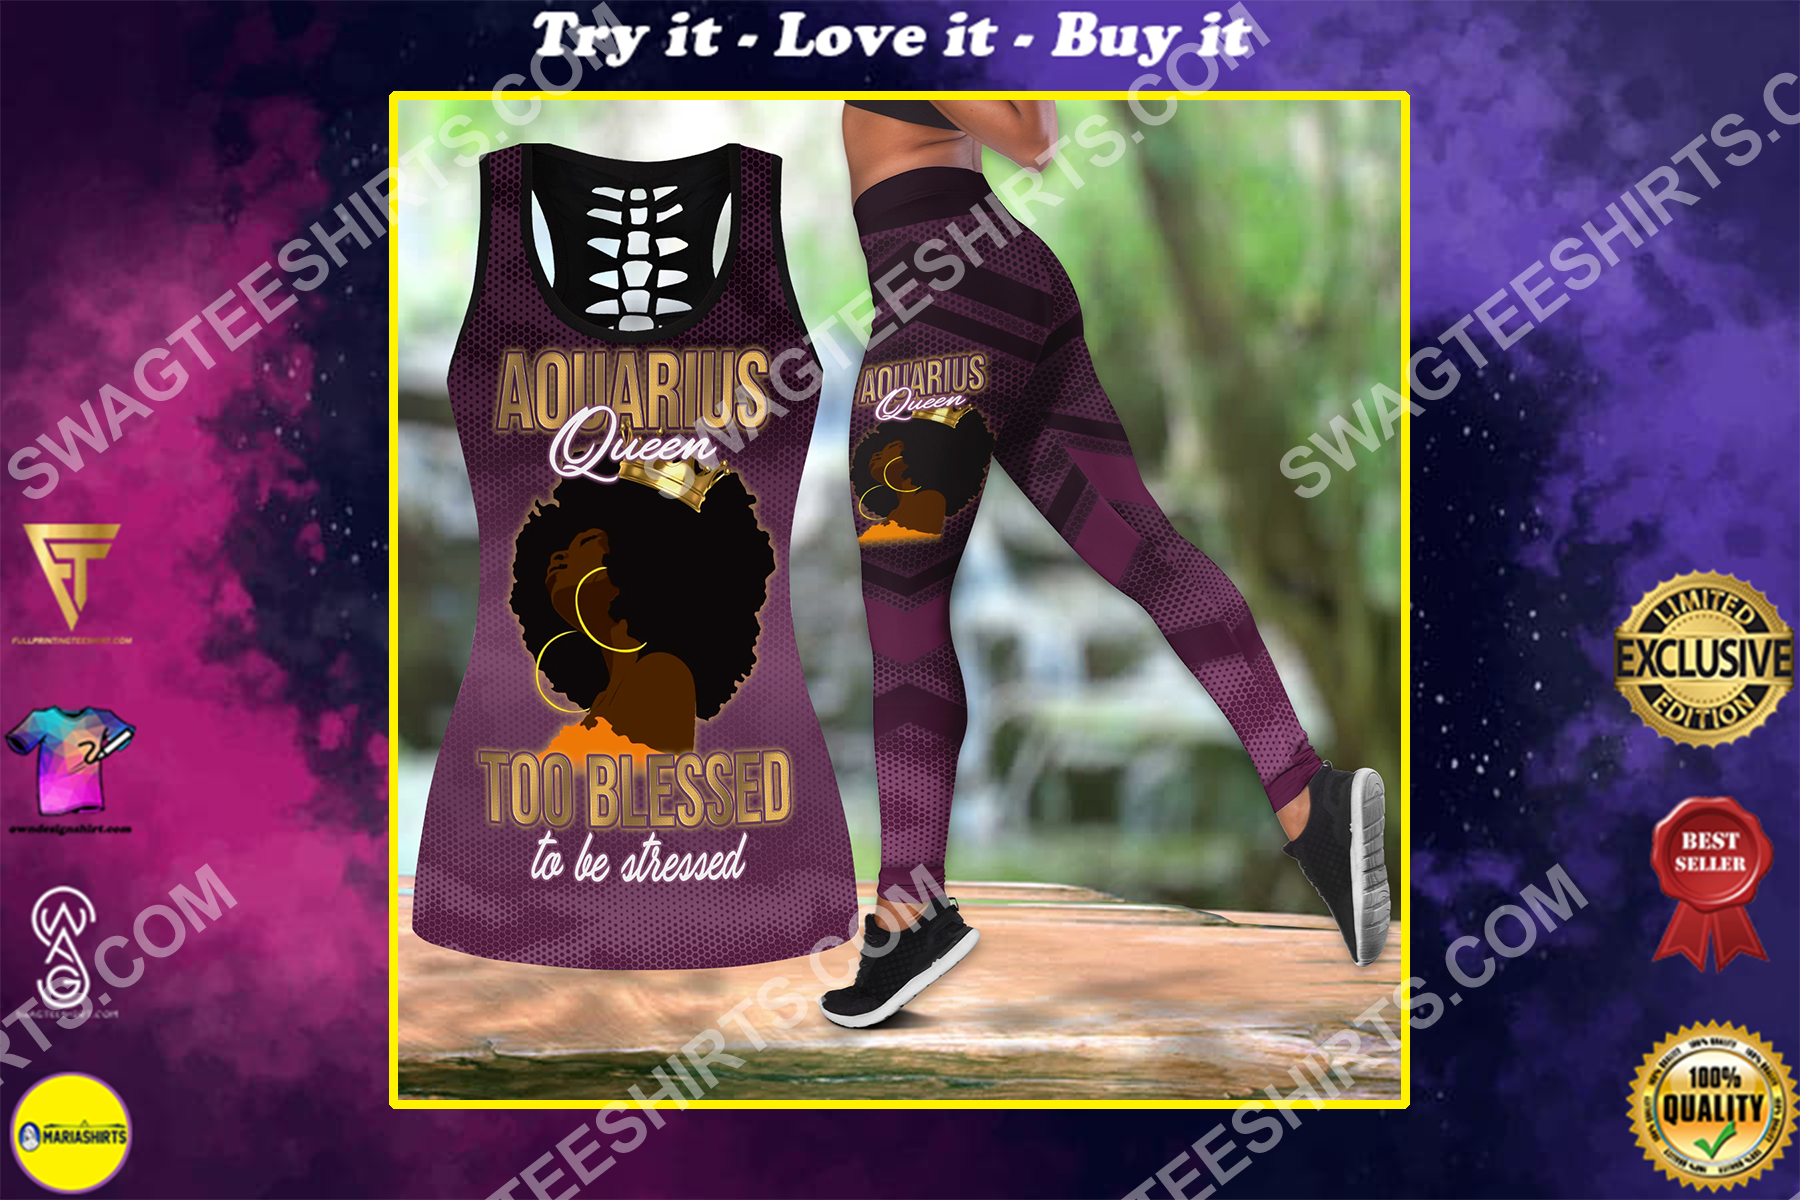 aquarius queen too blessed to be stressed birthday gift set sports outfit